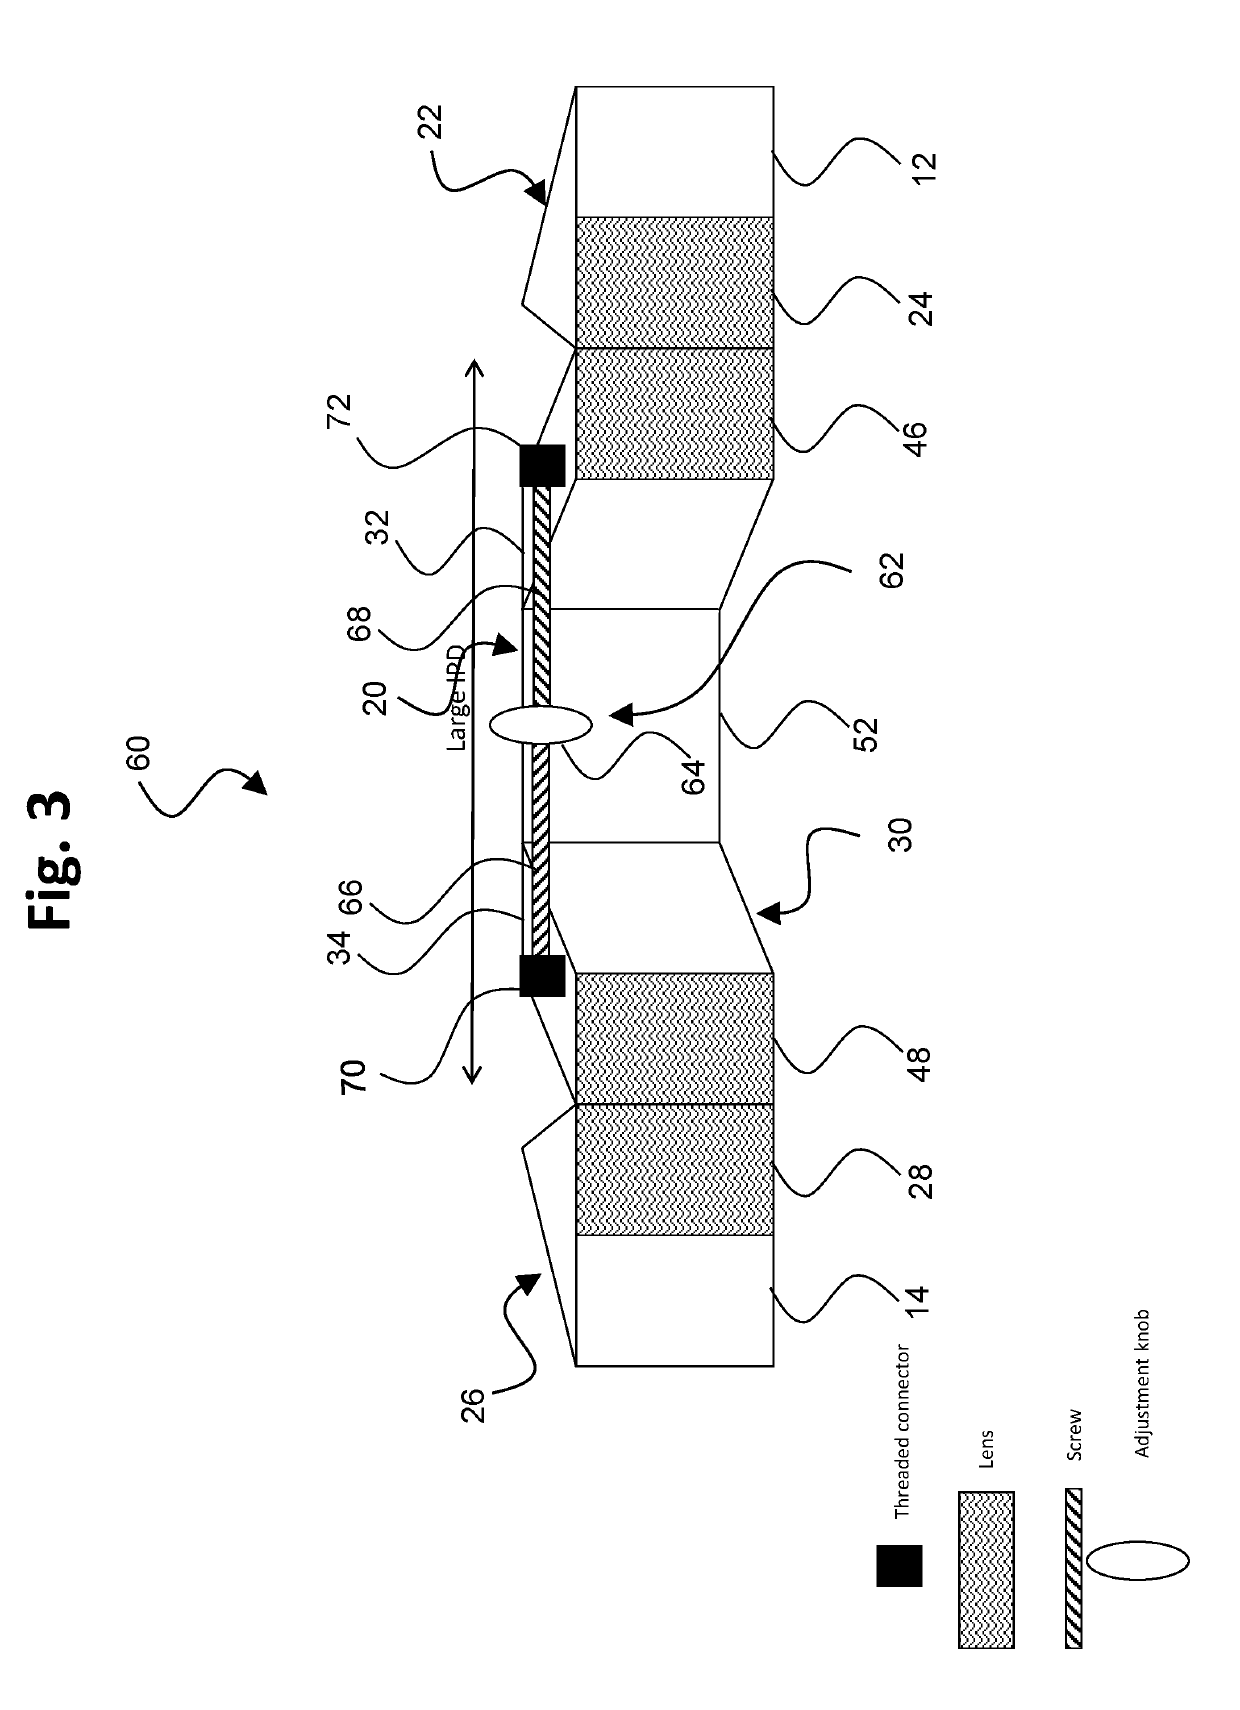 Interpupillary distance adjustment mechanism for a compact head-mounted display system